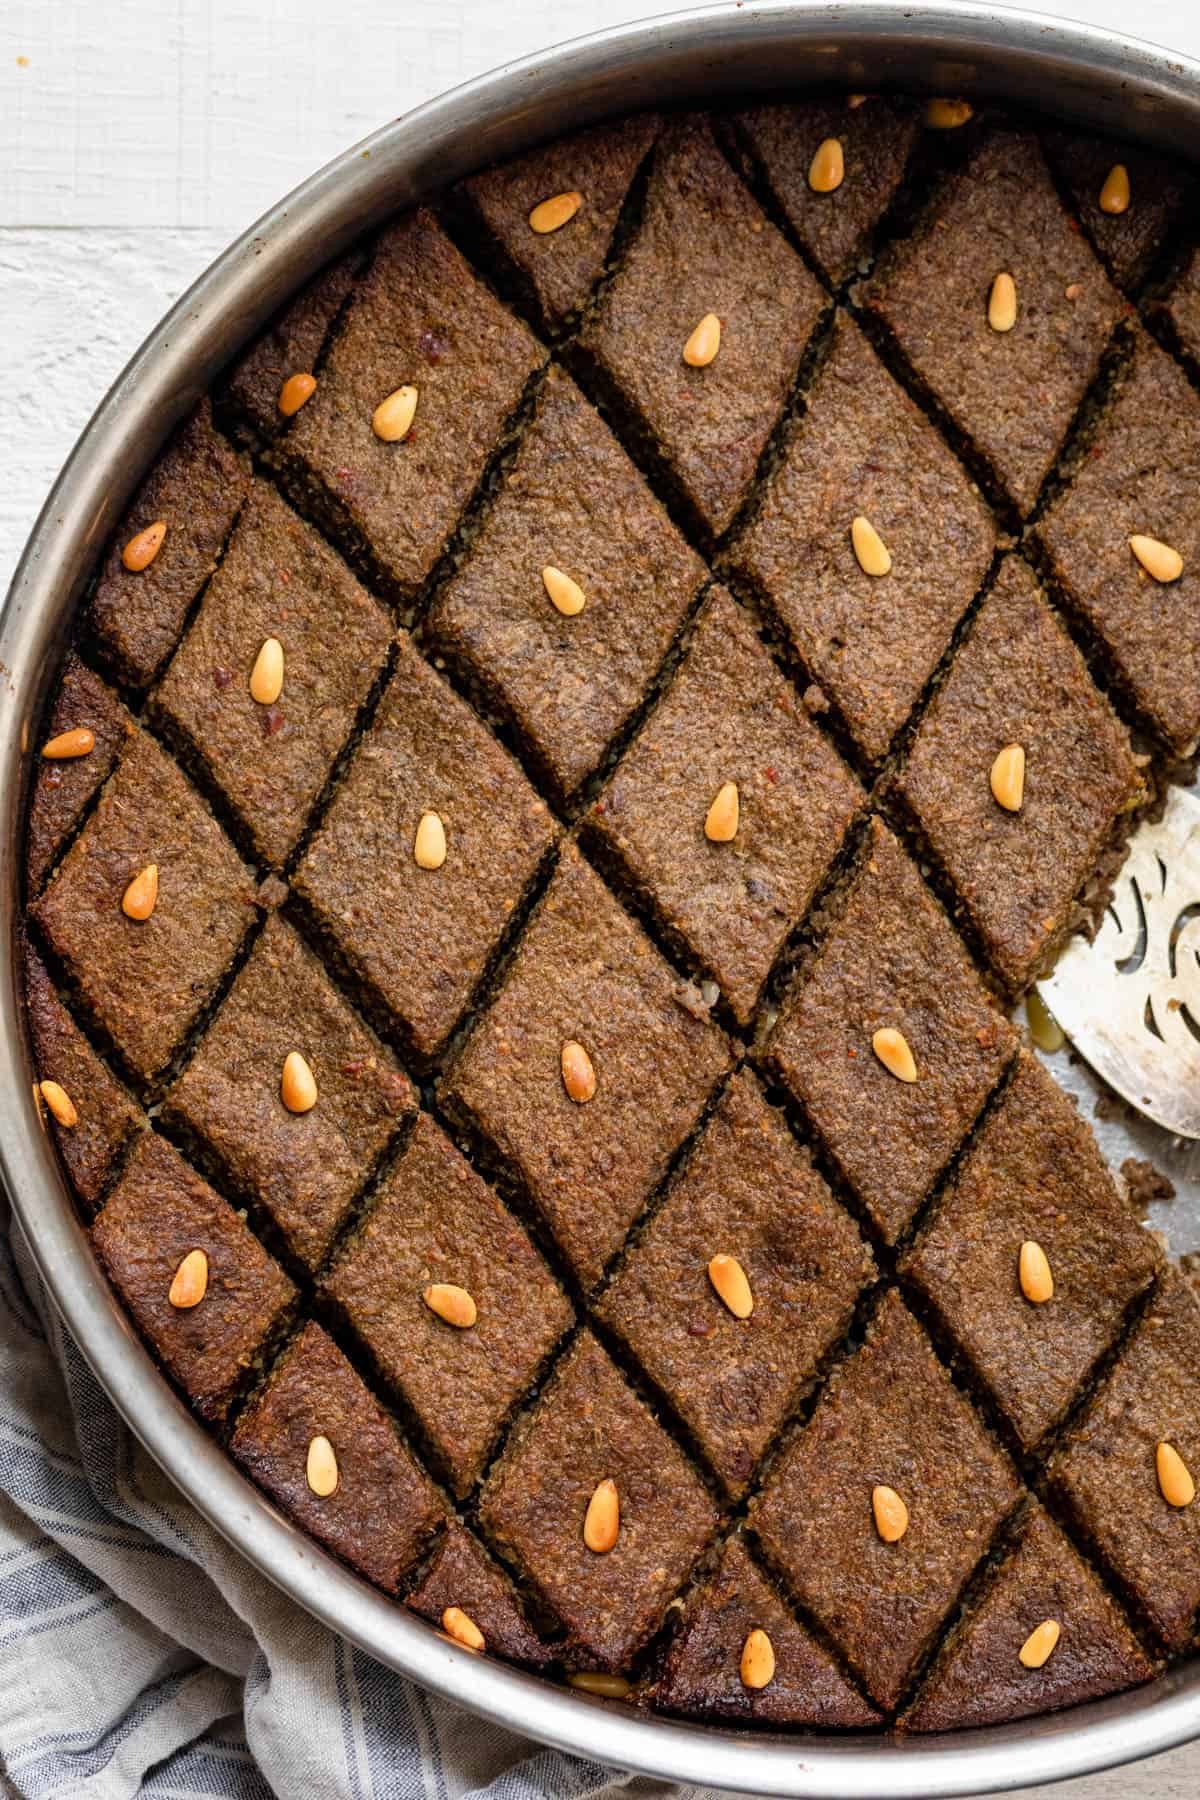 Baked kibbeh (also called kibbeh bil sanieh) topped with pine nuts